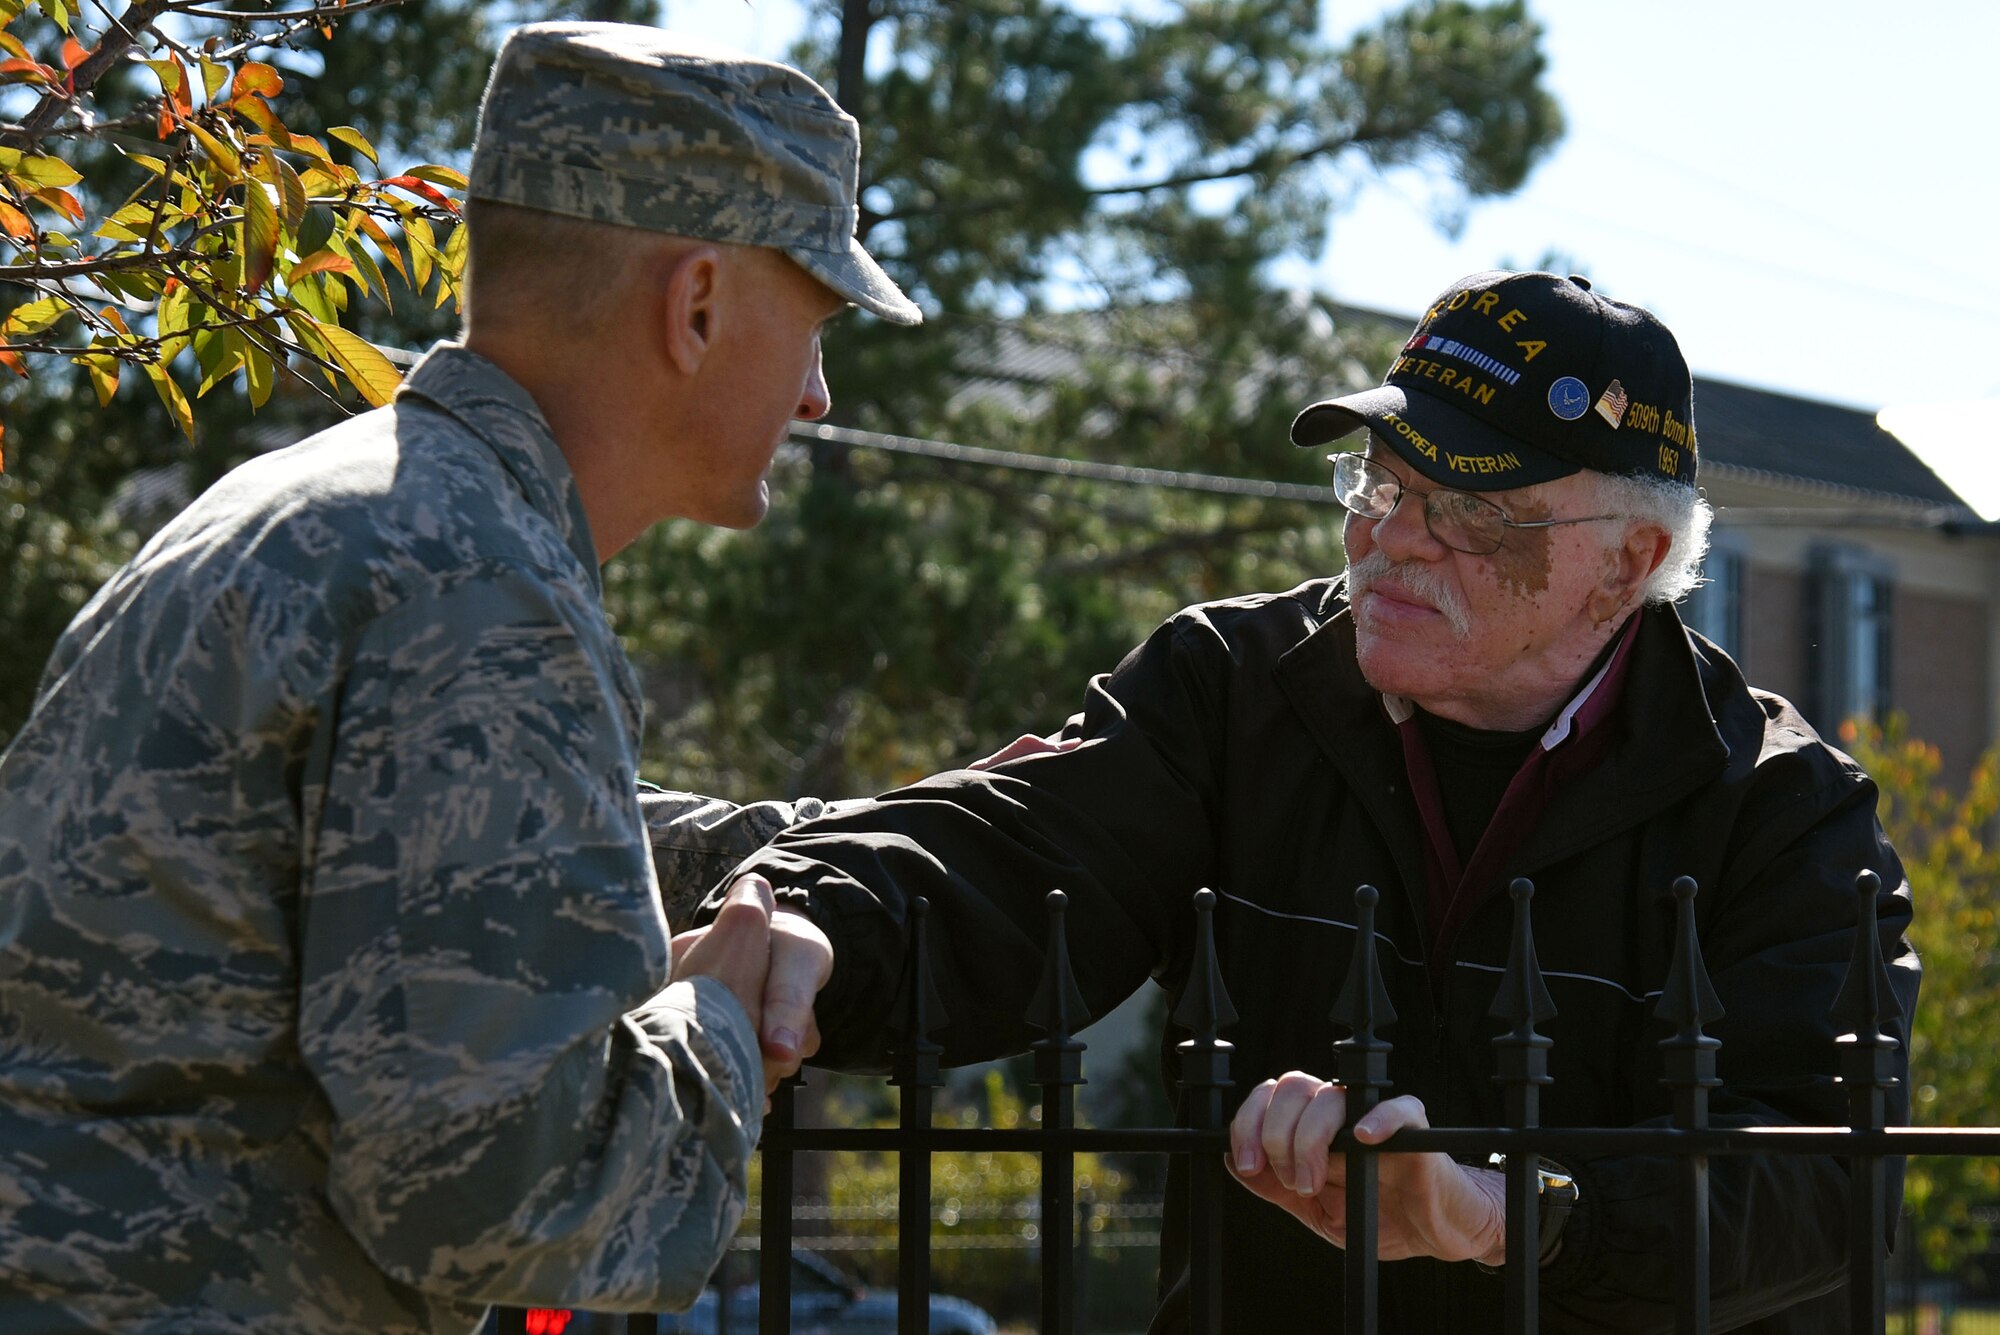 U.S. Air Force Col. Daniel Lasica, 20th Fighter Wing commander, left, shakes the hand of a veteran during a Veterans Day Celebration parade in Sumter, South Carolina, Nov. 11, 2017.